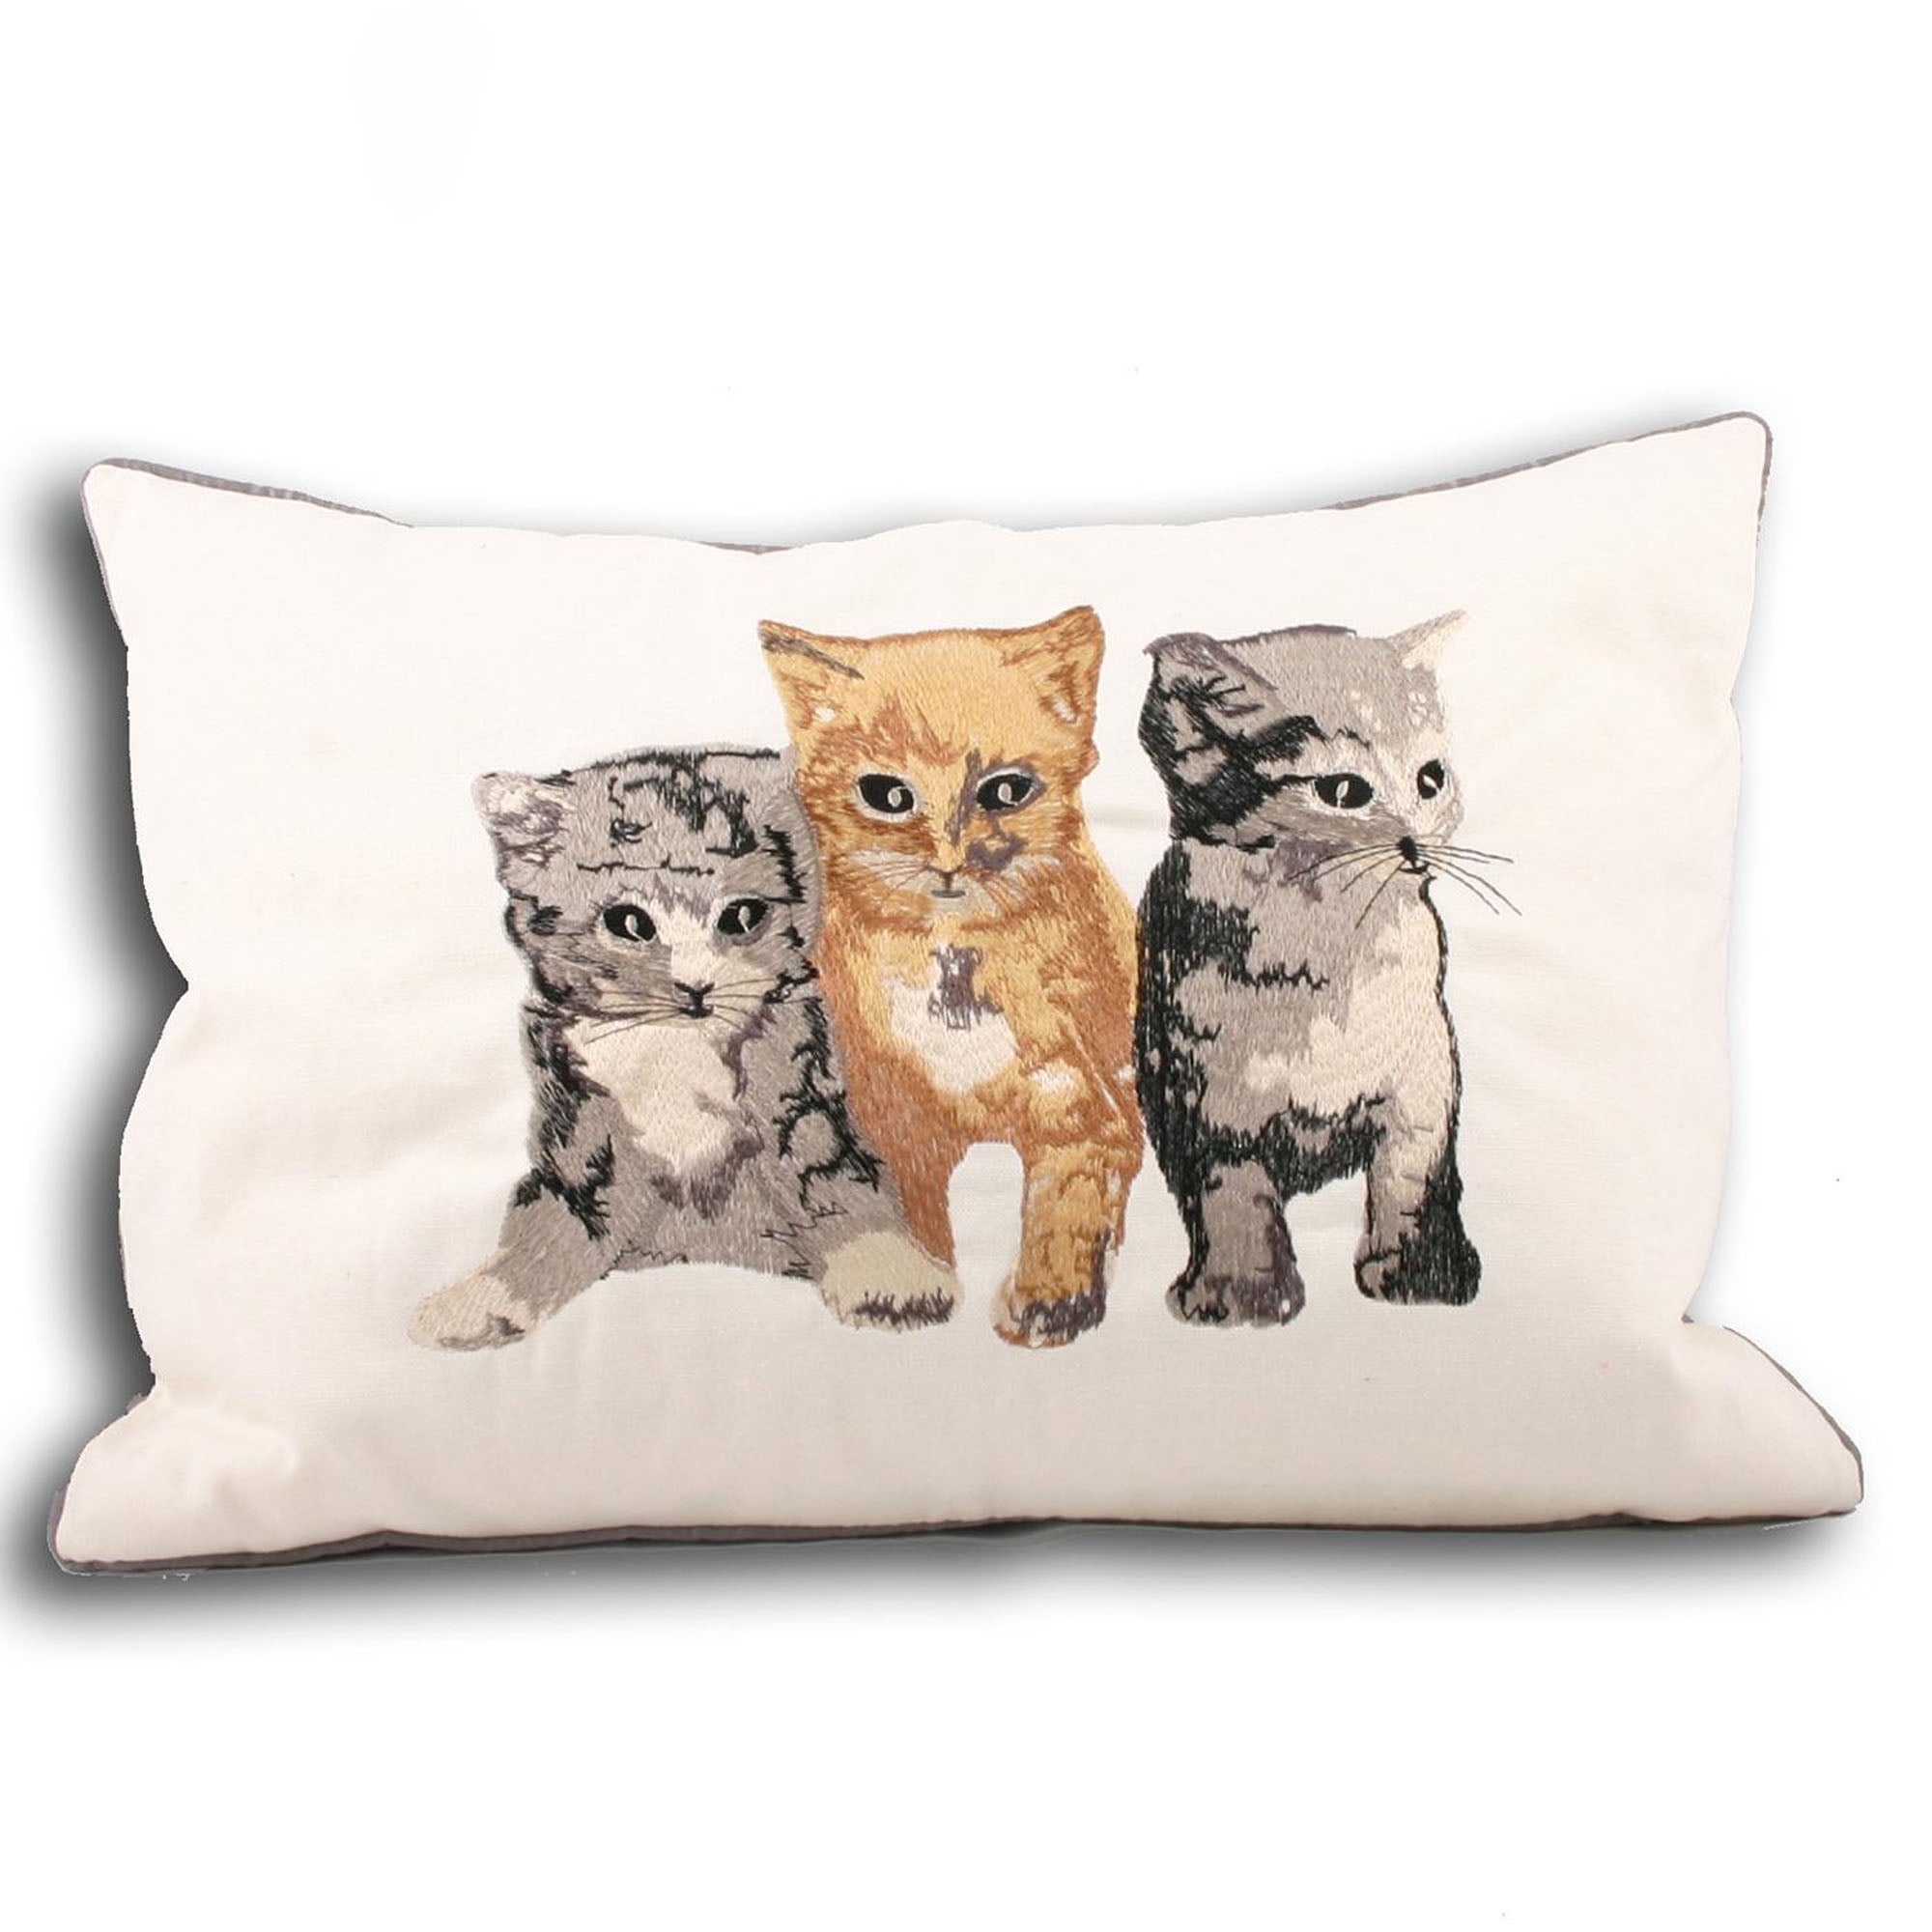 Photos - Pillow A&D Kitty Cushion White, Grey and Brown 